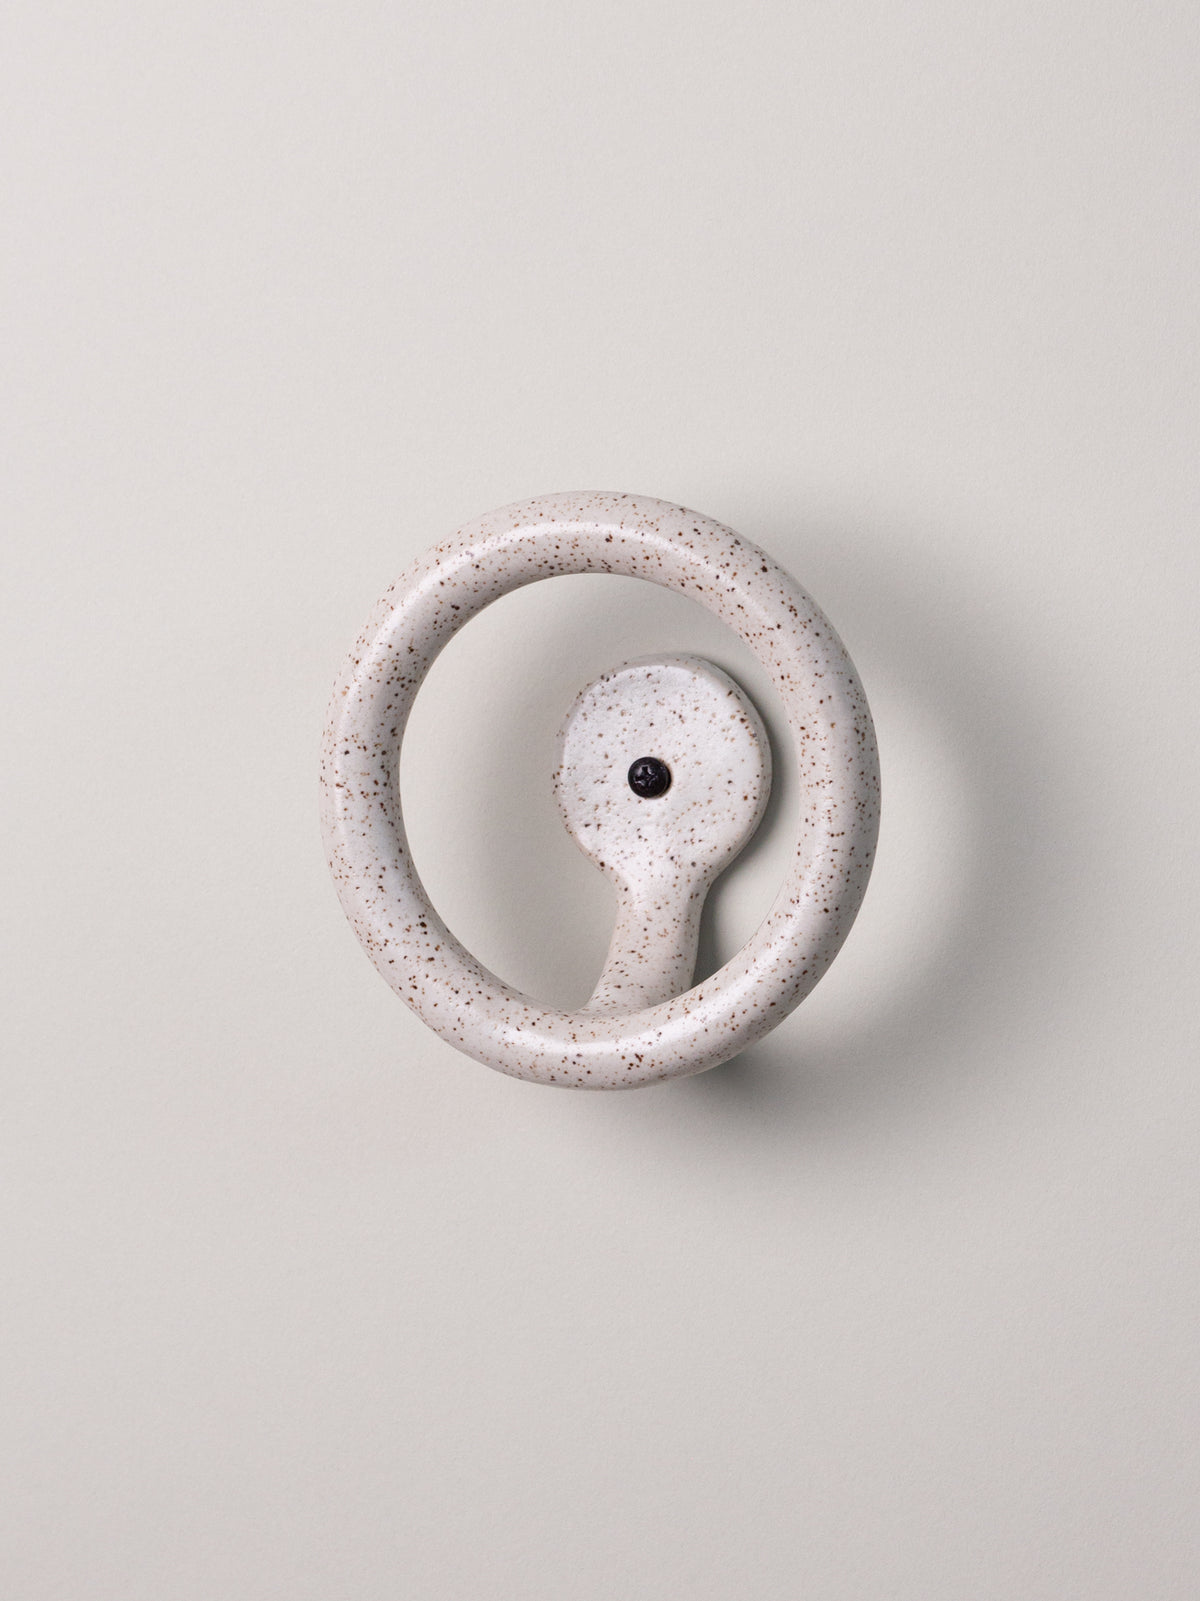 Uni Wall Hook, Speckled White